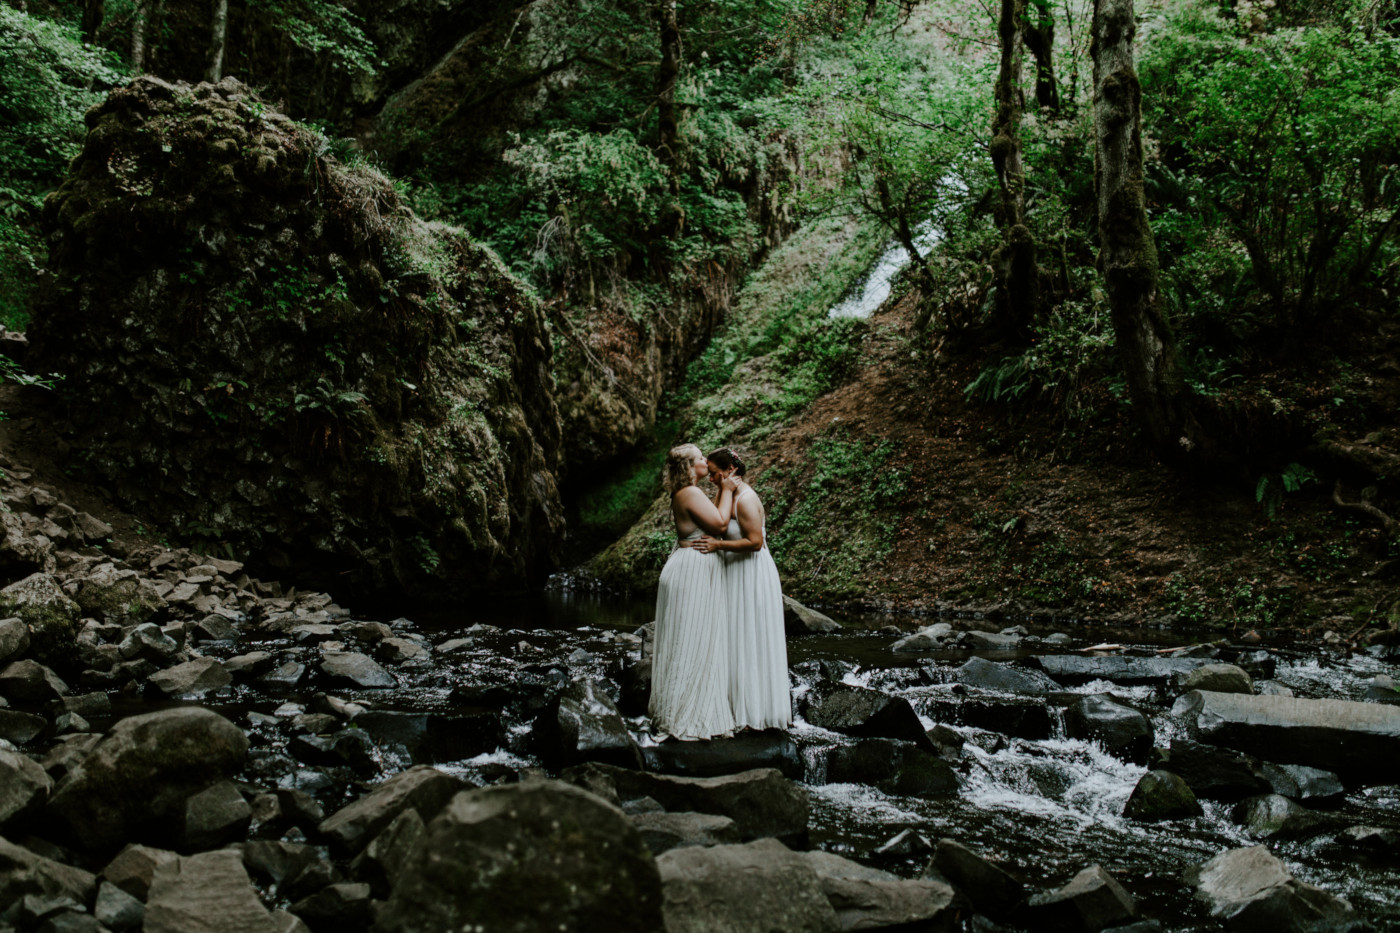 Kate and Audrey stand along the stream. Elopement wedding photography at Bridal Veil Falls by Sienna Plus Josh.